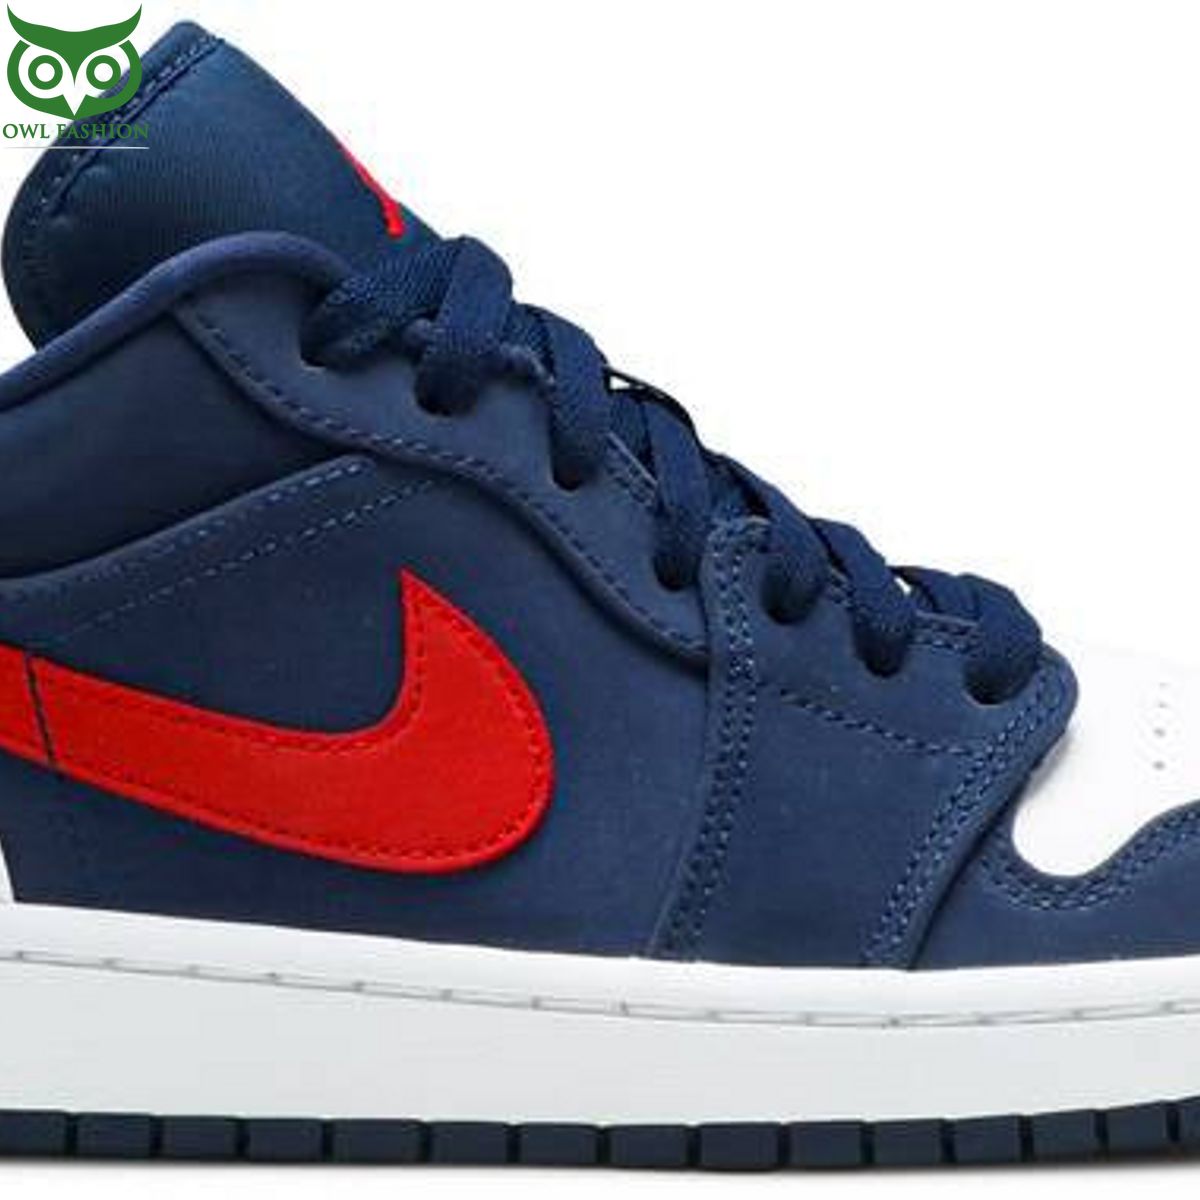 Air Jordan 1 Low USA The color palette is both soothing and vibrant.